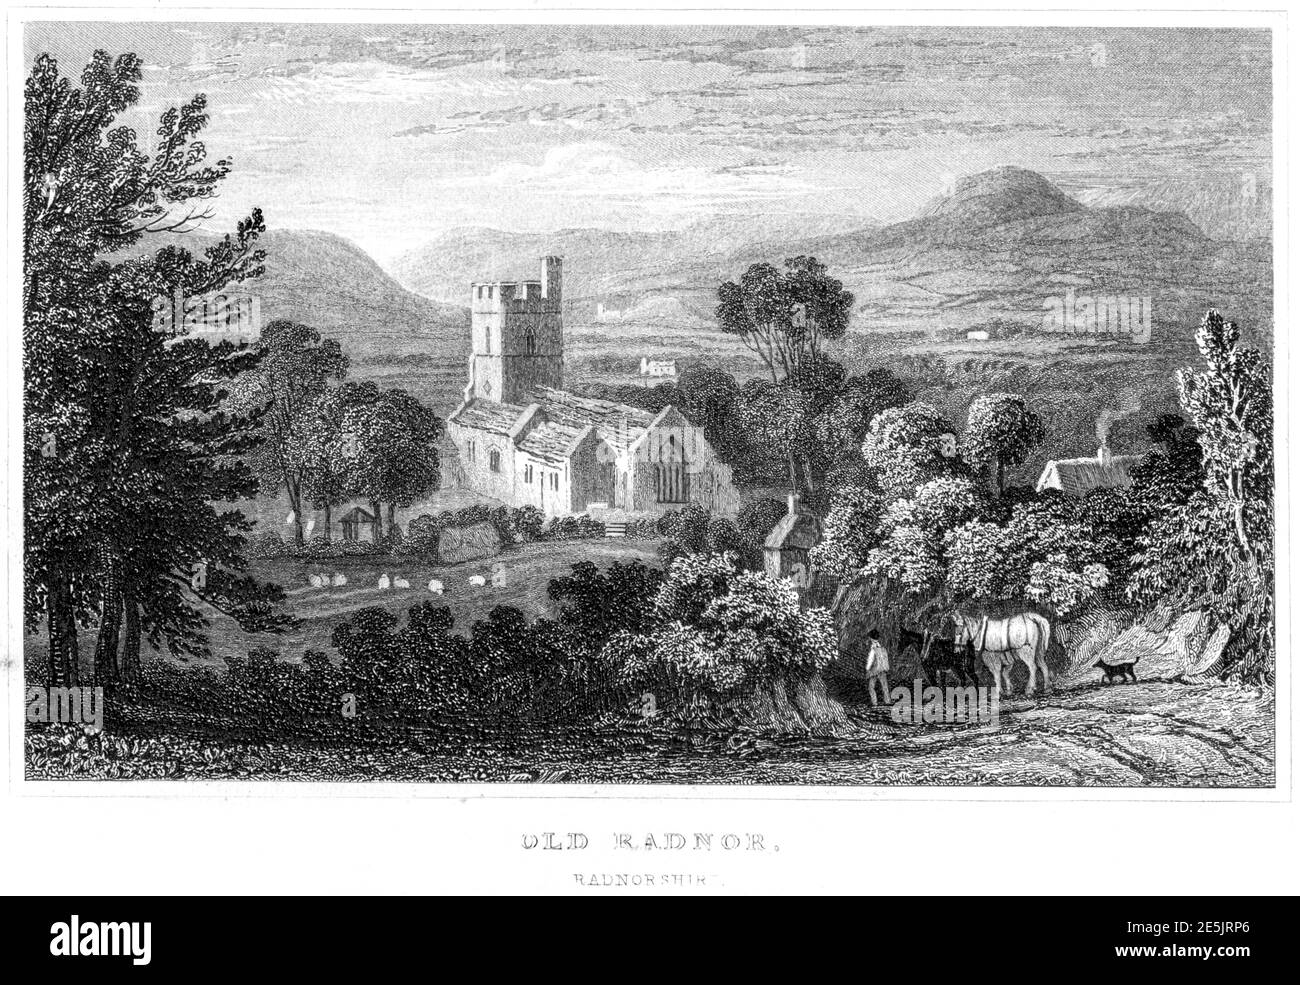 An engraving of Old Radnor, Radnorshire scanned at high resolution from a book published in 1854.  Believed copyright free. Stock Photo